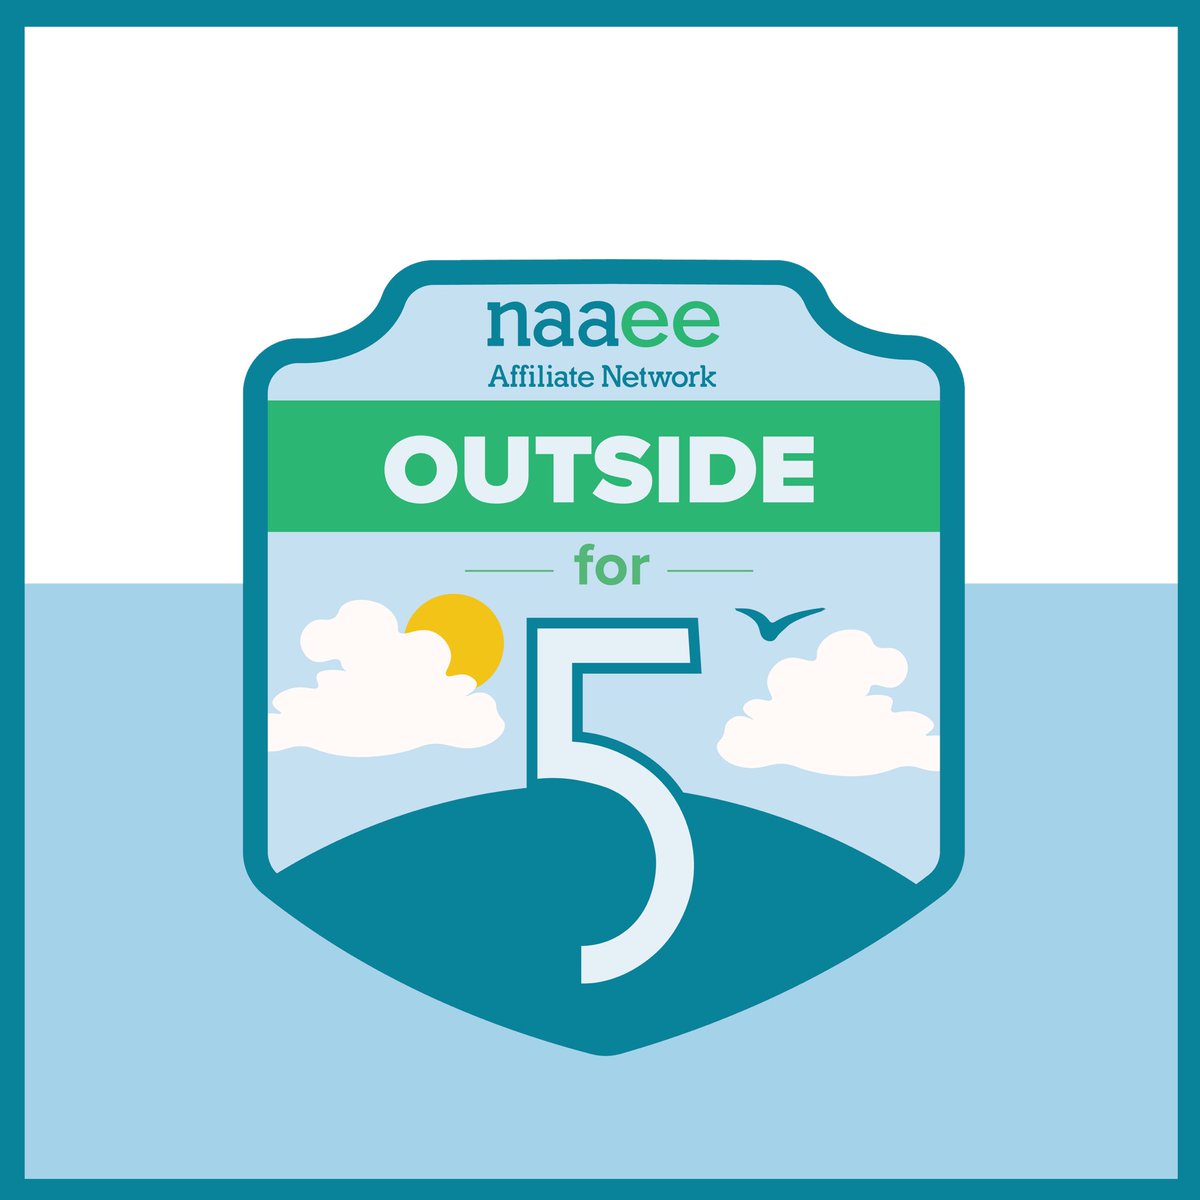 When students go outdoors, they become more confident,attentive, creative & cooperative. ✅ #OutsideFor5 is a pledge campaign from NAAEE that encourages educators to incorporate outdoor activity at least 5 min/day, 5 days/week.Learn more & begin today @ outsidefor5.com 🍃